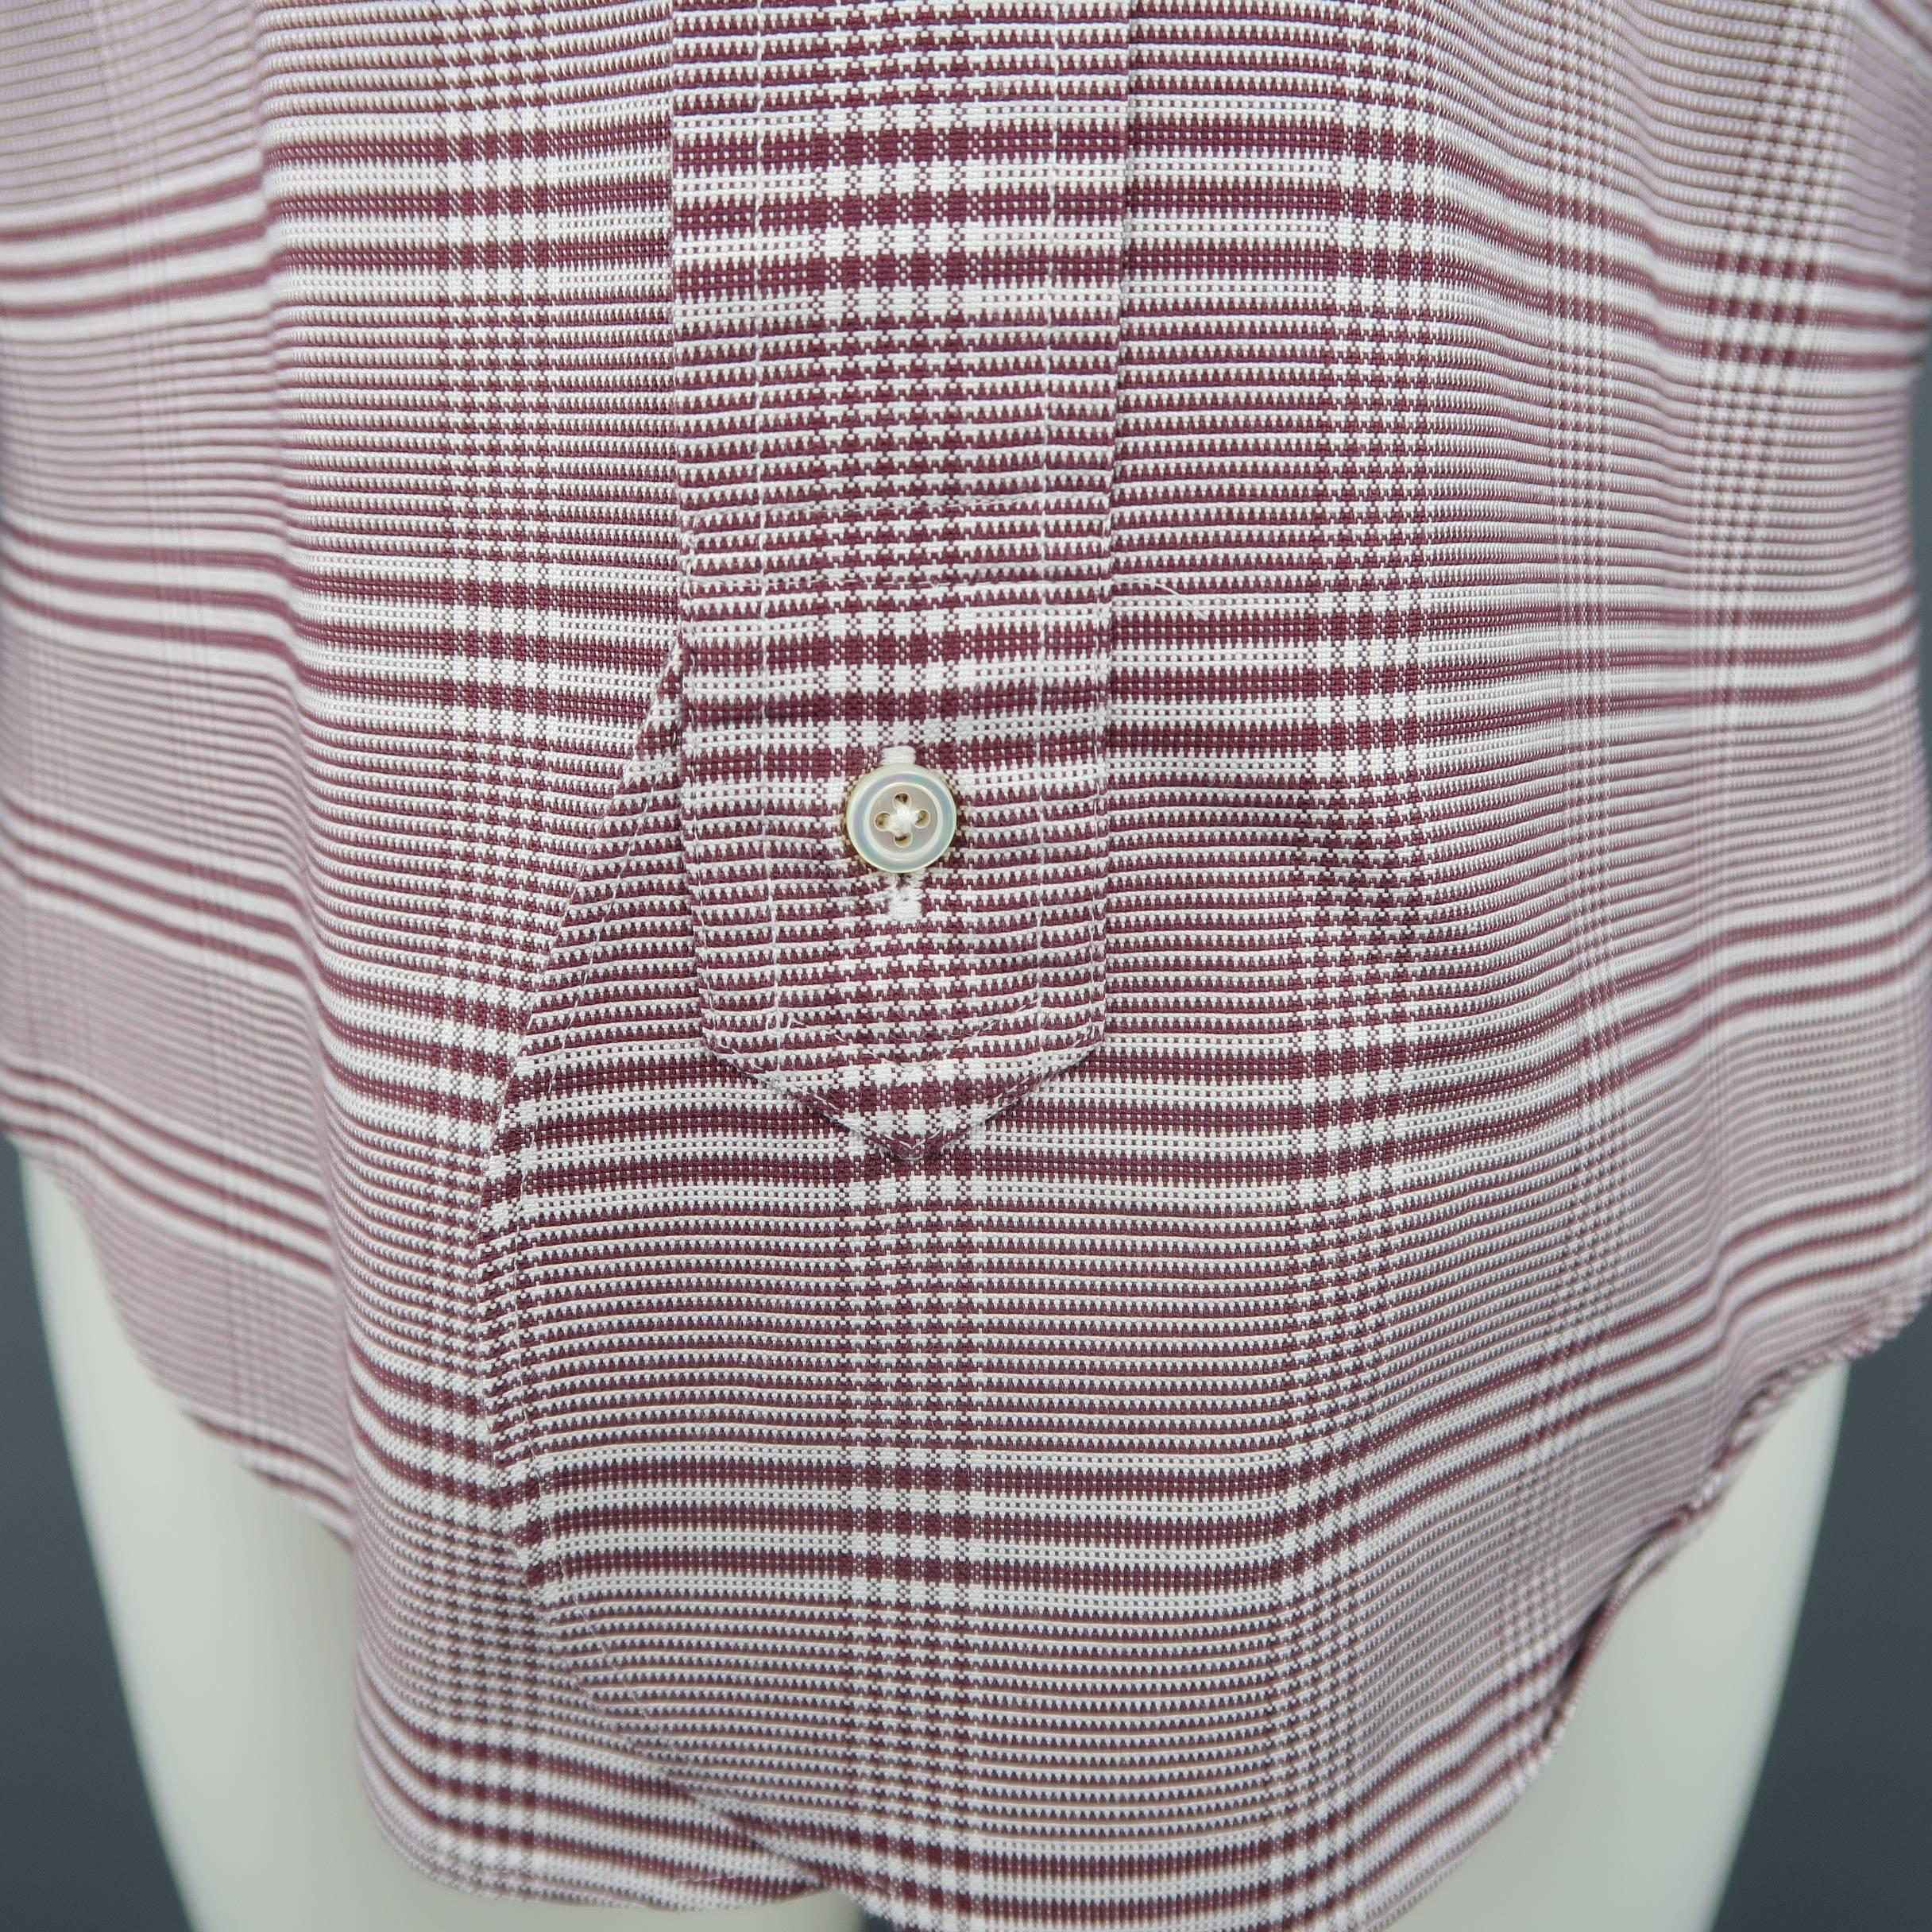 BLACK FLEECE by THOM BROWNE shirt comes in burgundy and white glenplaid print cotton with a pointed button down collar, patch breast pocket, curved hem detail, and back tab. Made in USA.
 
Excellent Pre-Owned Condition.
Marked: BB0
 
Measurements:
